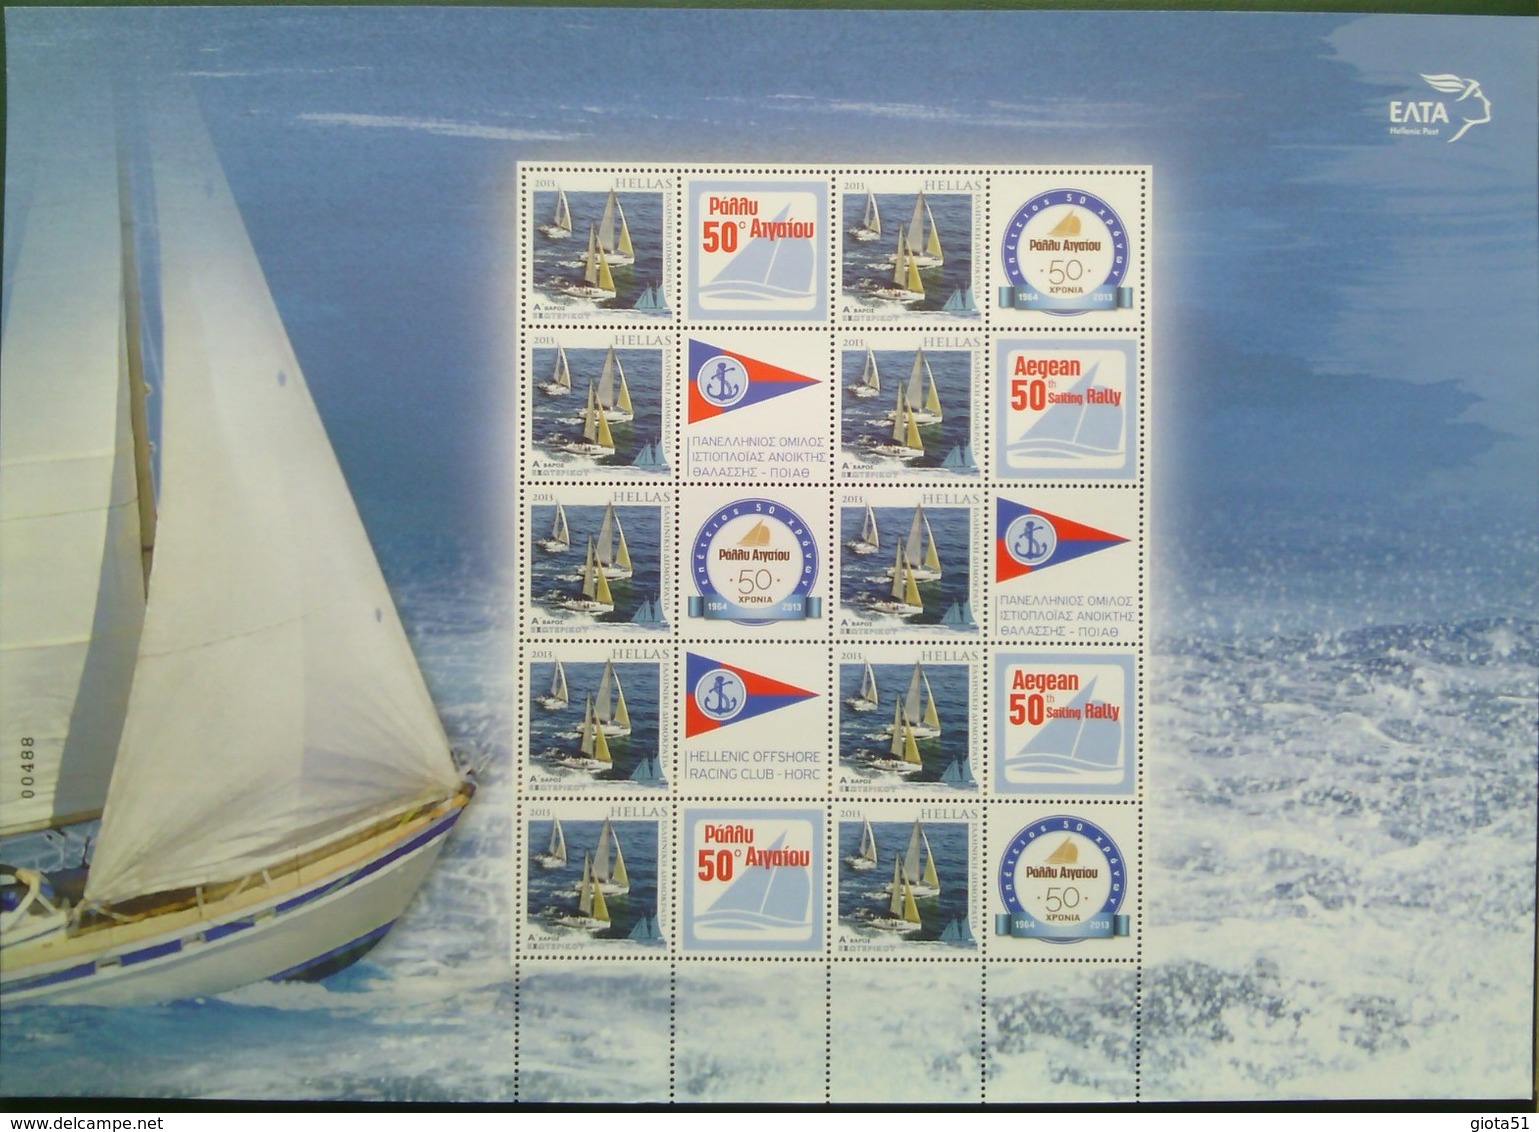 B5  Aegean 50th Sailing Rally 2013 Personal Stamps - Unused Stamps